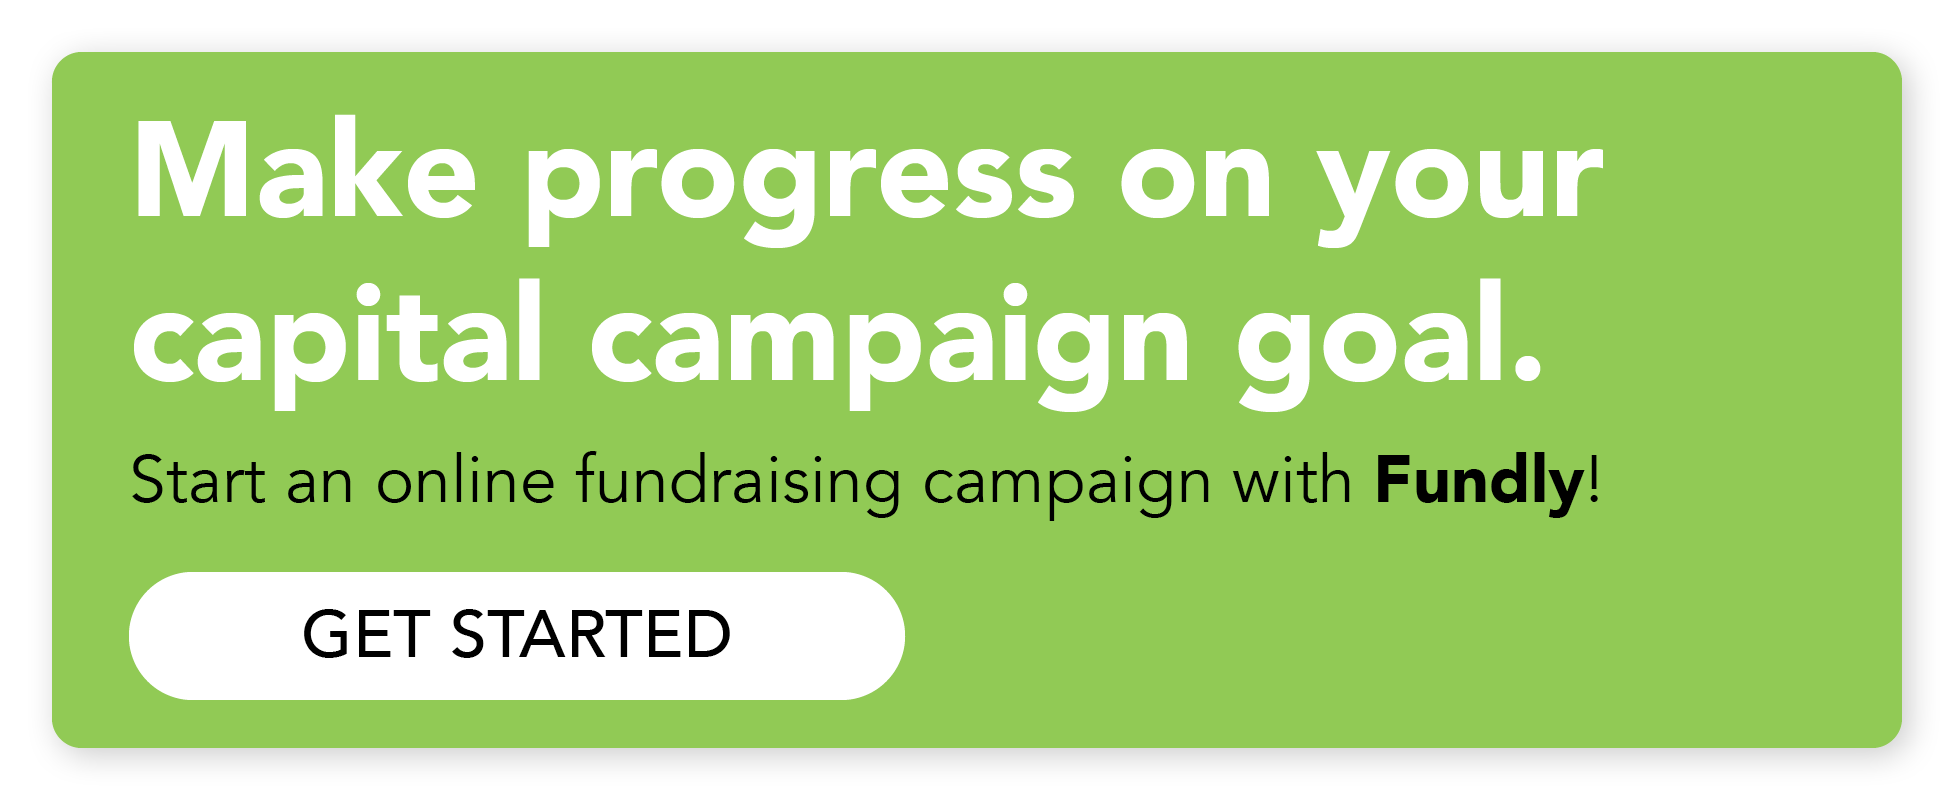 Get started with Fundly and make progress on your capital campaign goal.